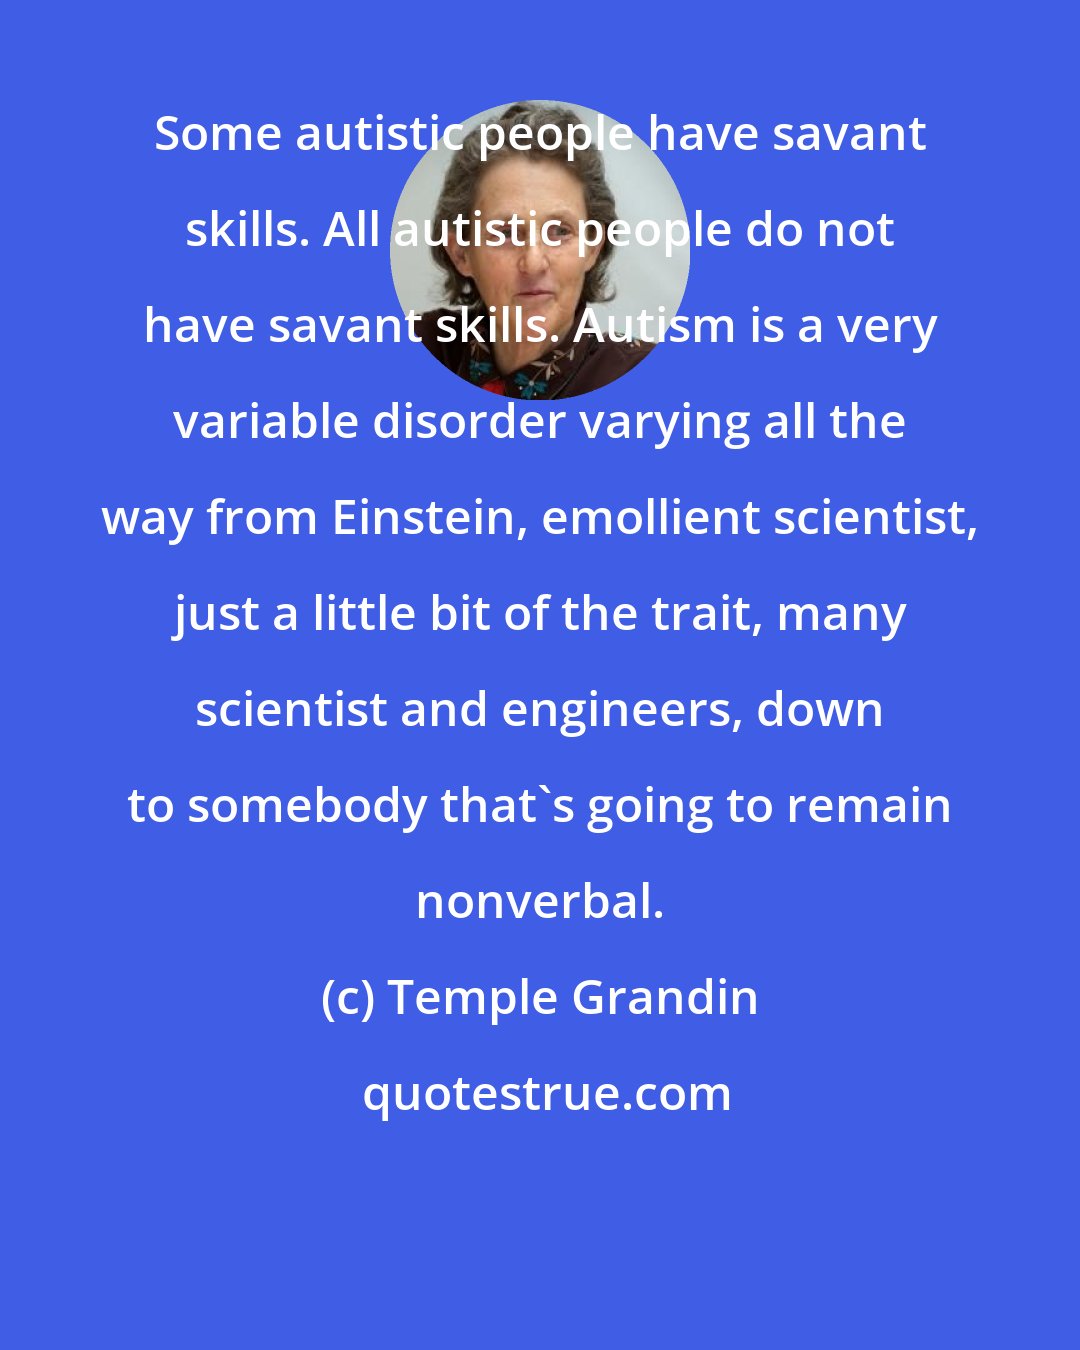 Temple Grandin: Some autistic people have savant skills. All autistic people do not have savant skills. Autism is a very variable disorder varying all the way from Einstein, emollient scientist, just a little bit of the trait, many scientist and engineers, down to somebody that's going to remain nonverbal.